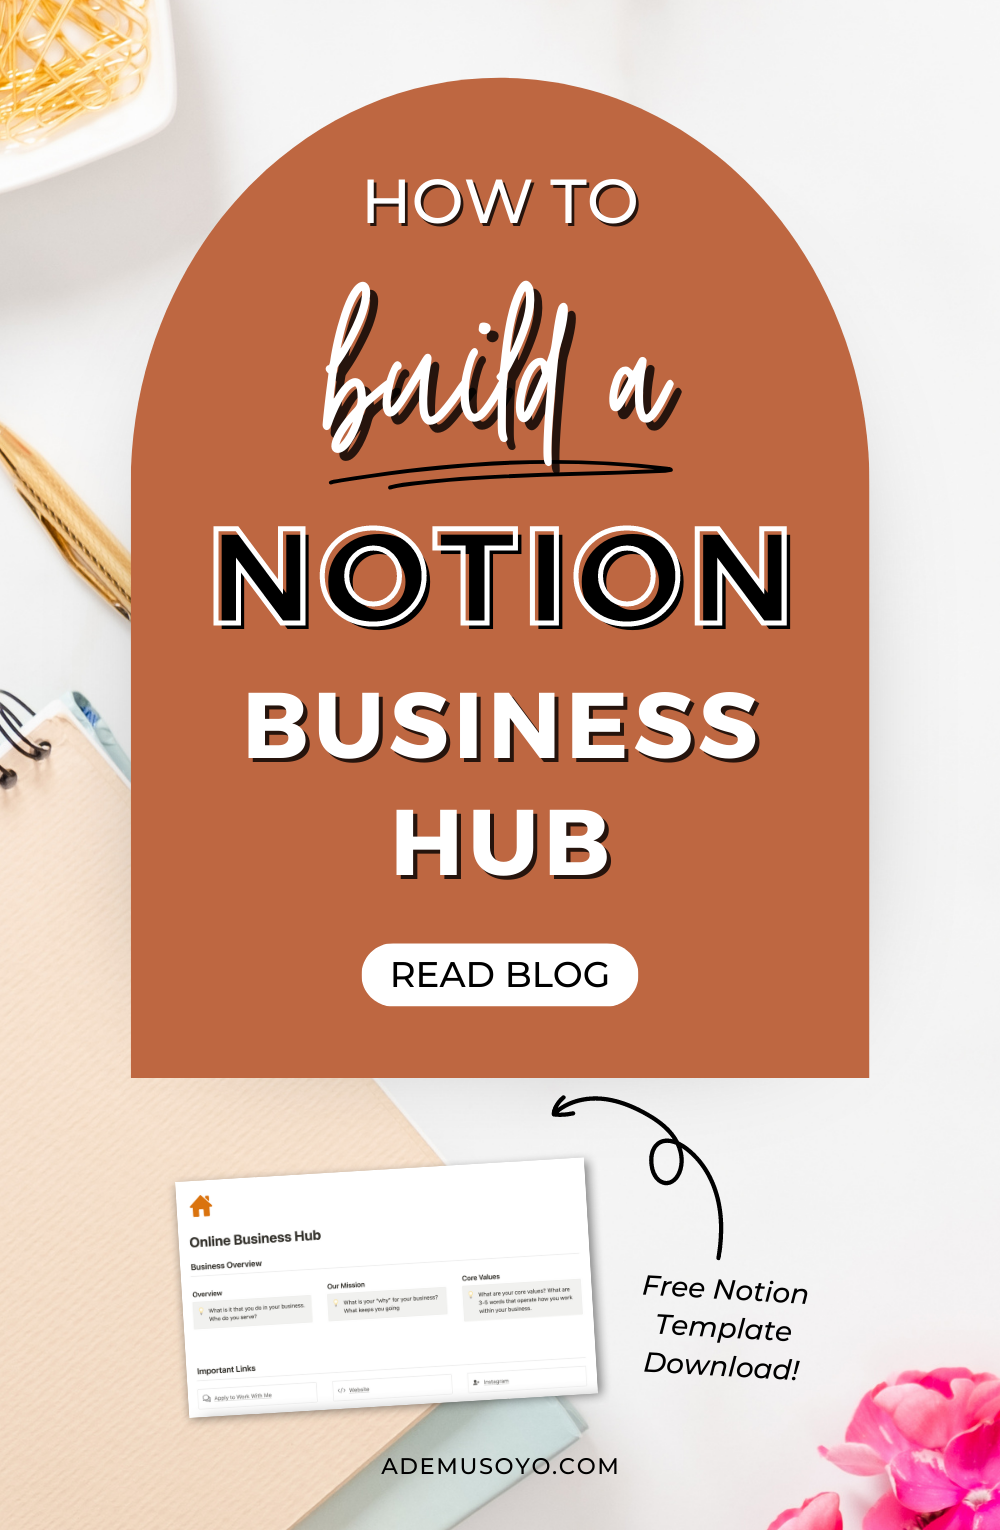 Elevate your business with a Notion business hub! Discover the power of centralization—track marketing strategies, manage projects, and measure success effortlessly. Your key to success is just a click away! Visit ademusoyo.com for more expert Notion for business tips designed for entrepreneurs like you looking to improve & increase your work productivity.